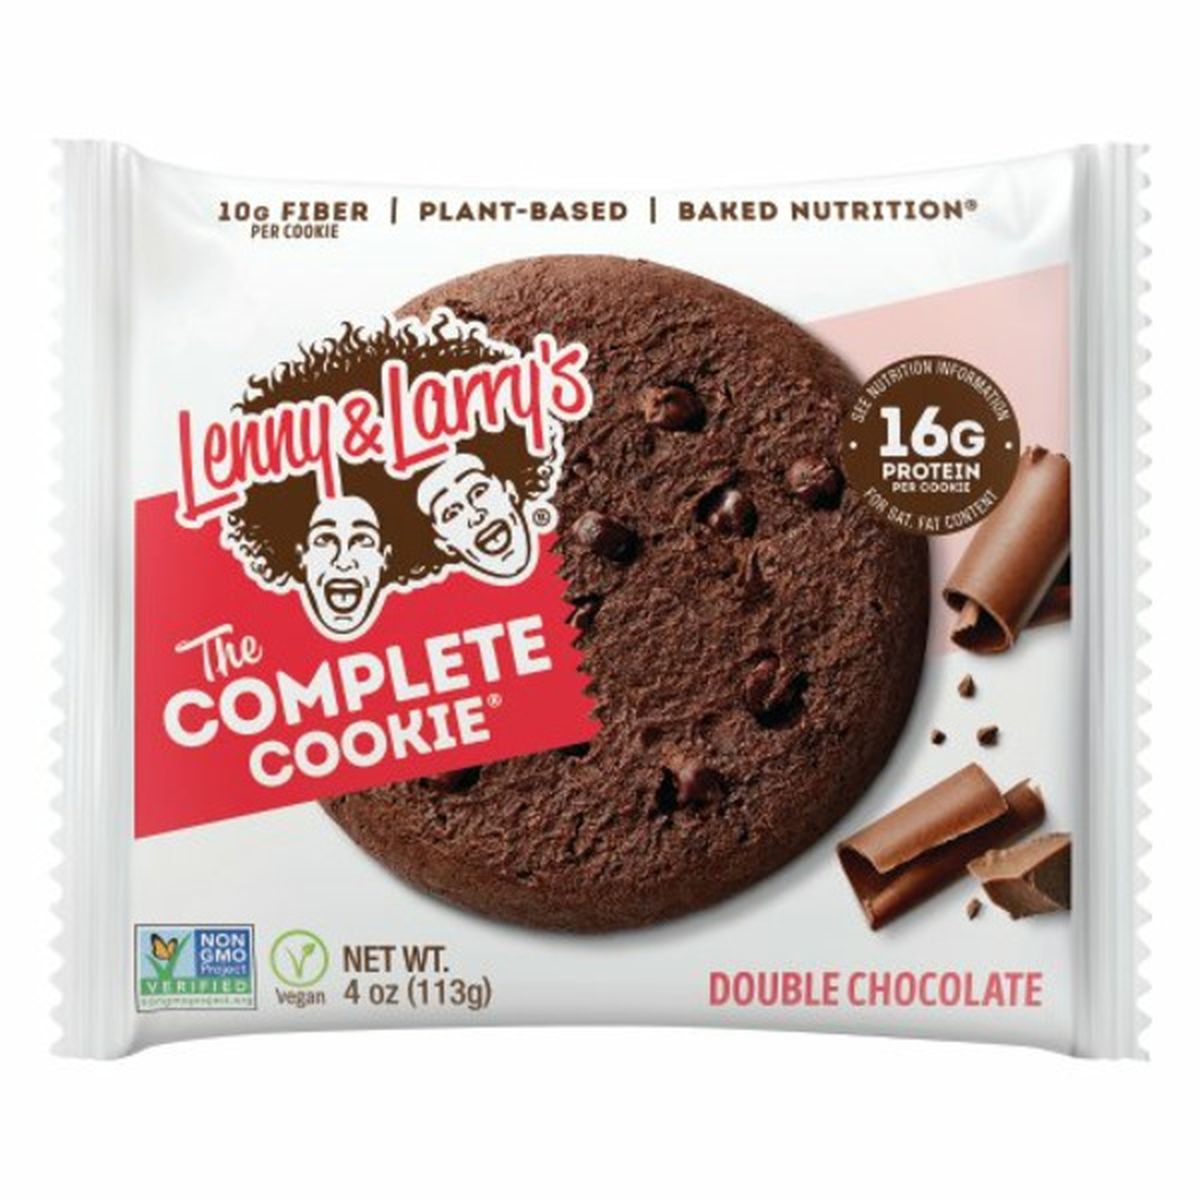 Calories in Lenny & Larry's The Complete Cookie, Double Chocolate